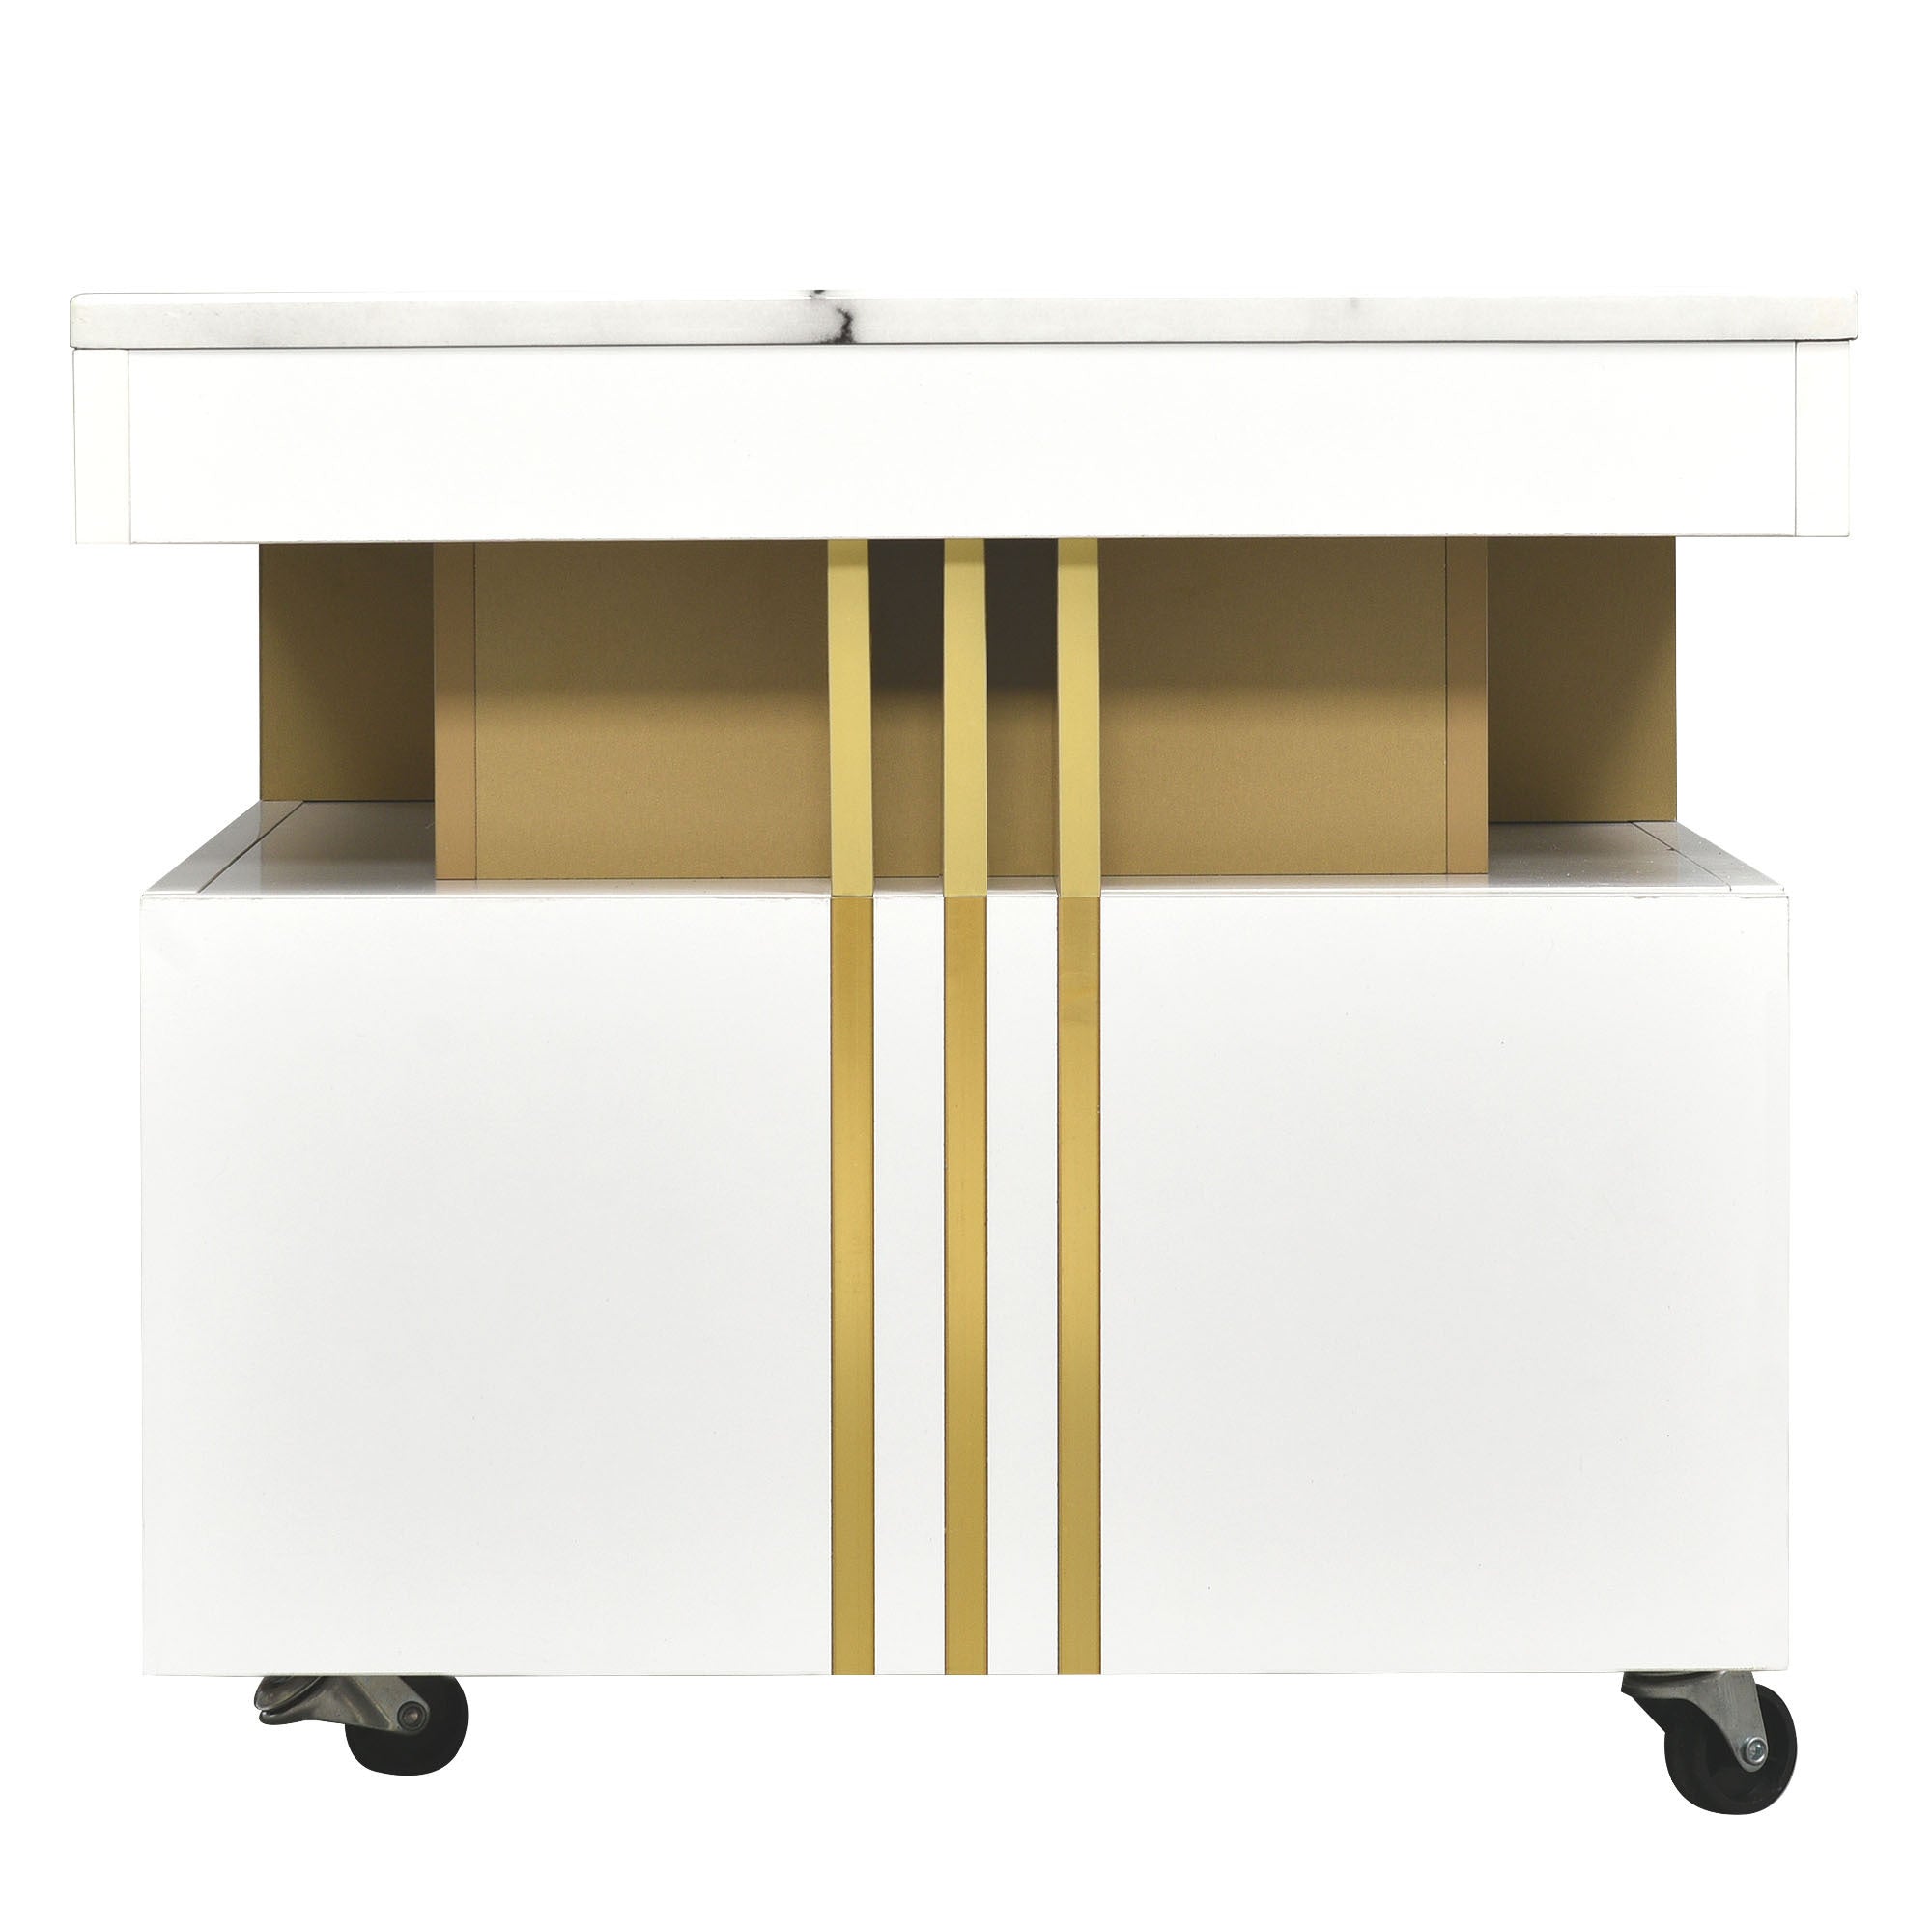 ON-TREND Contemporary Coffee Table with Faux Marble Top, Rectangle Cocktail Table with Caster Wheels, Moderate Luxury Center Table with Gold Metal Bars for Living Room, White